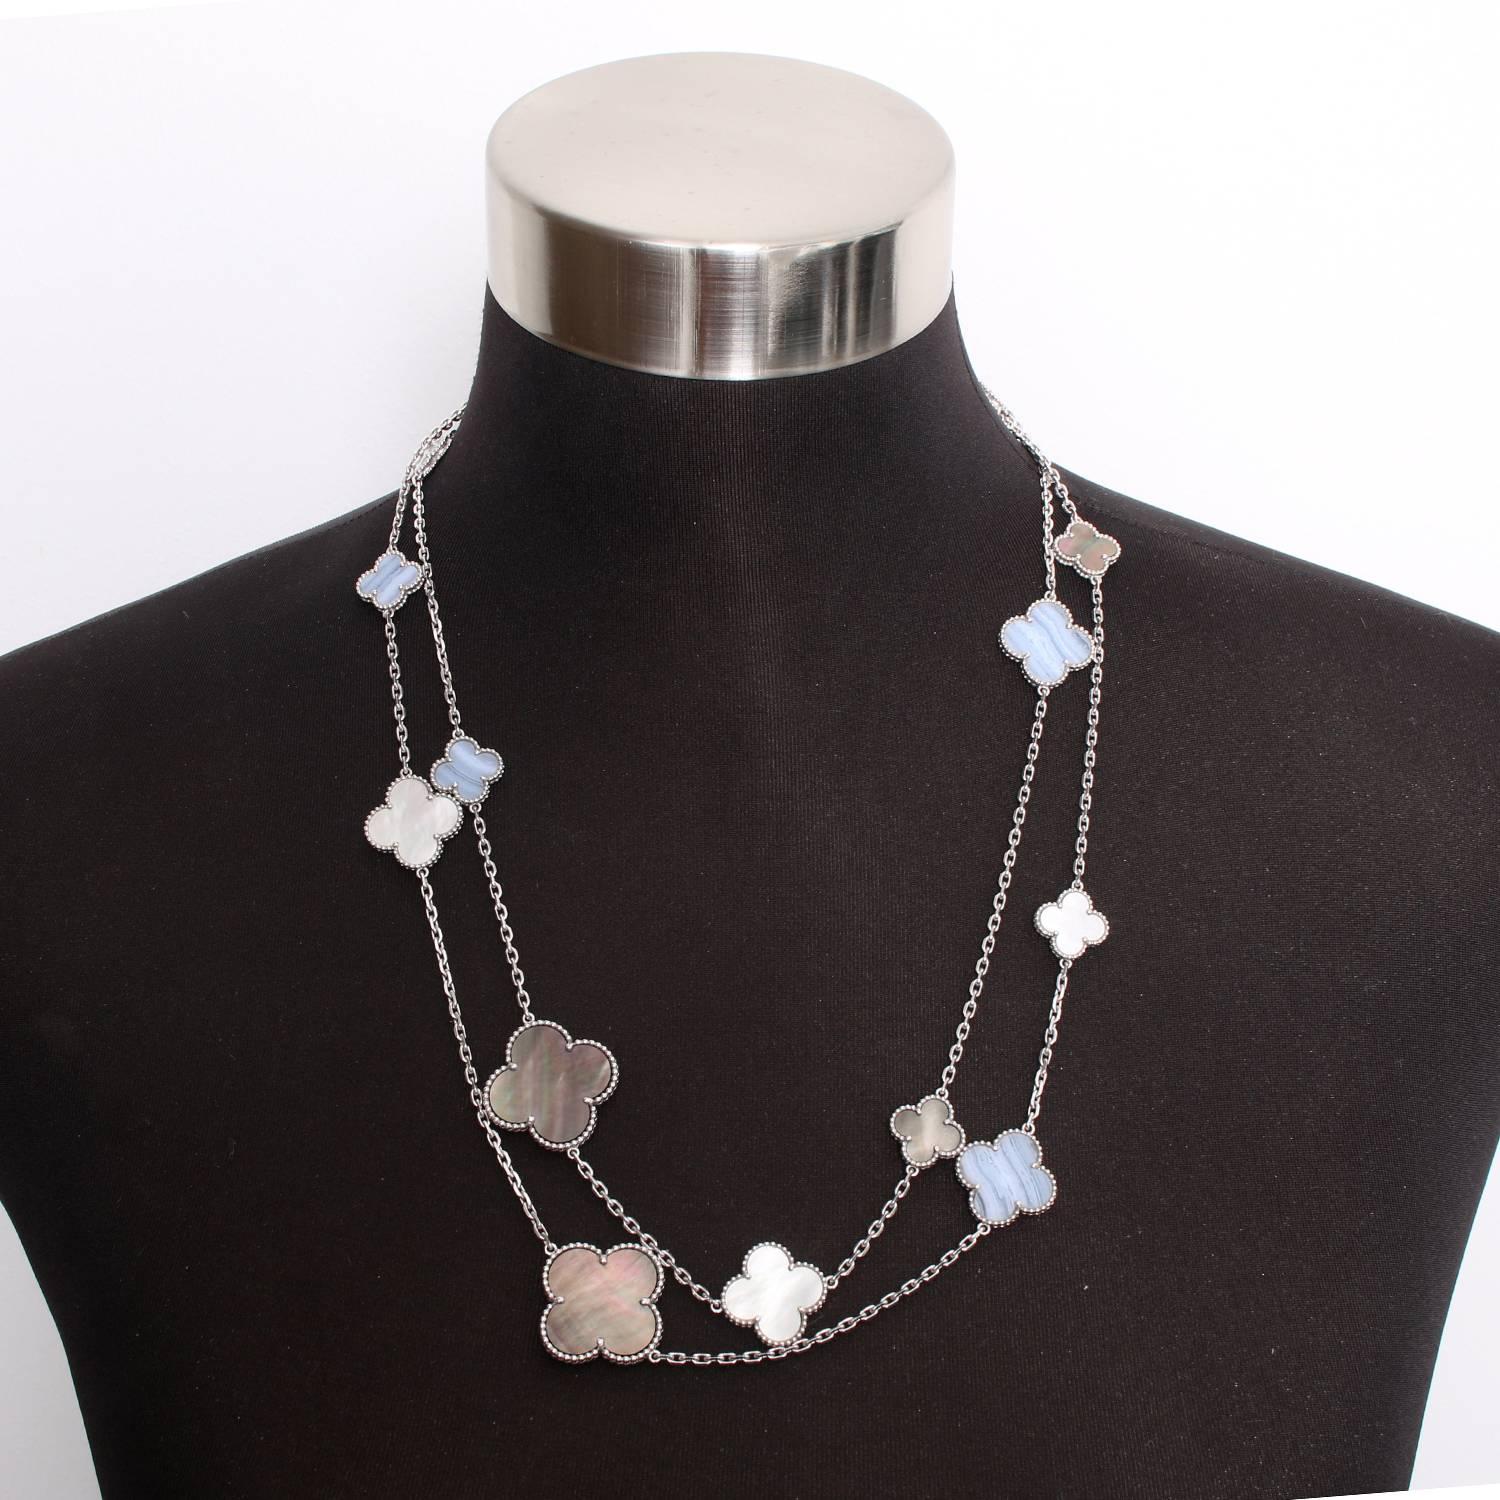 Van Cleef & Arpels Magic Alhambra Long Necklace  - White Gold necklace with Van Cleef & Arpels clover motif in White & gray Mother of Pearl and Chalcedony. Chain length 48 inches. Can be worn as a single strand or double. Pre-owned with box and